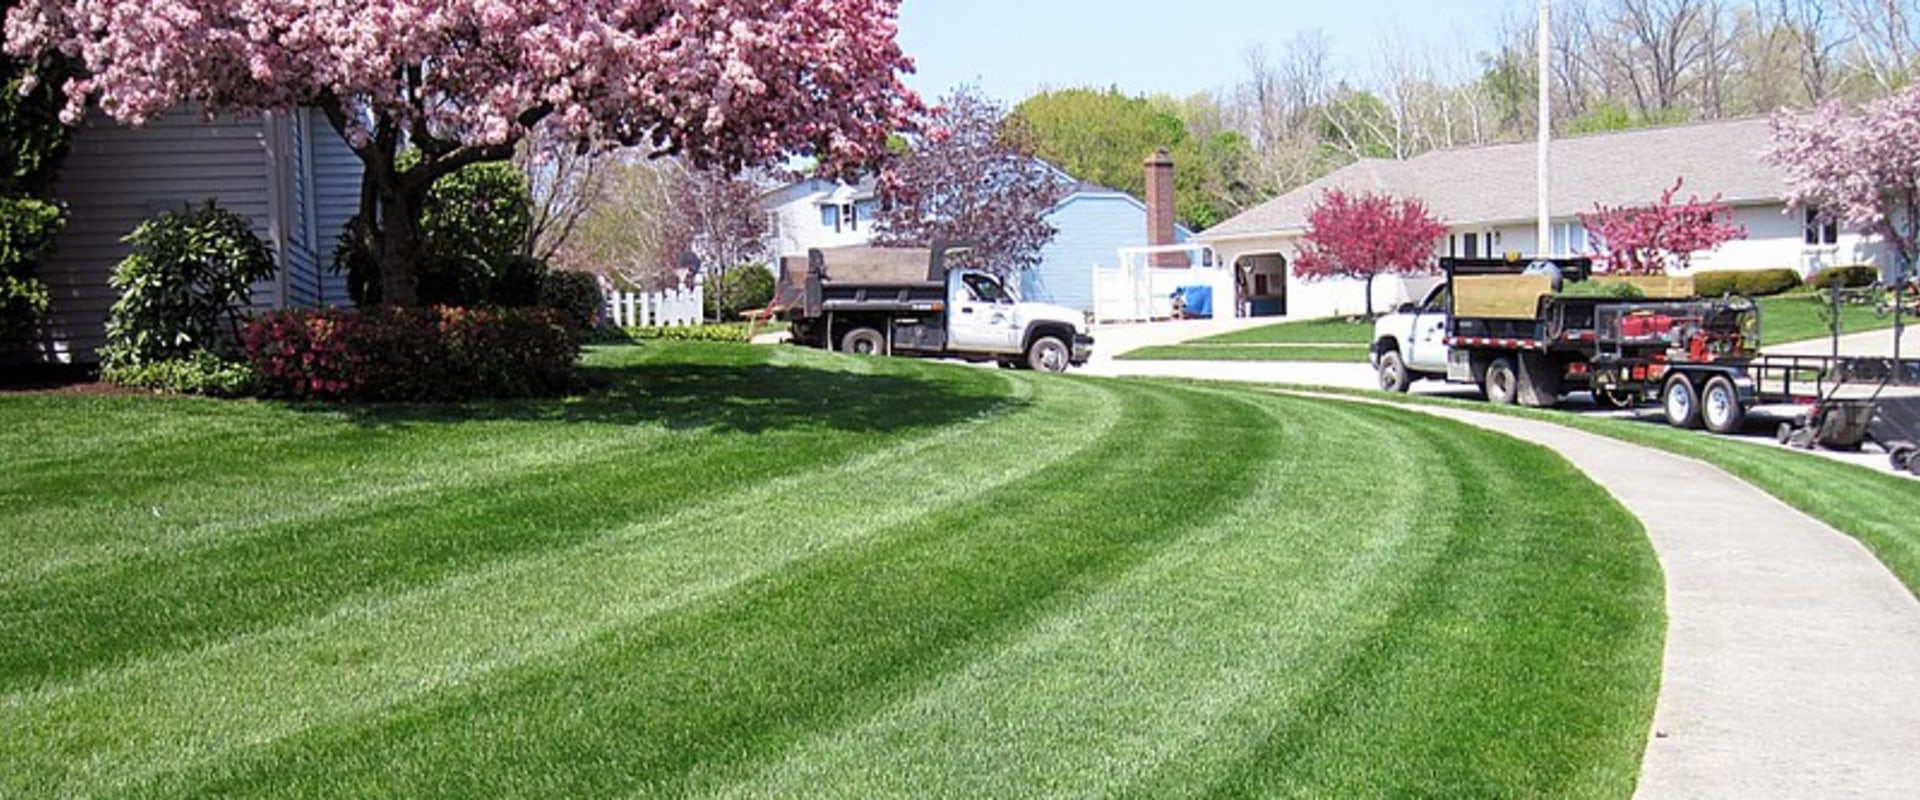 Beyond The Blooms: Maintaining Kingsbury's Beauty With Post-Landscaping Lawn Care Services